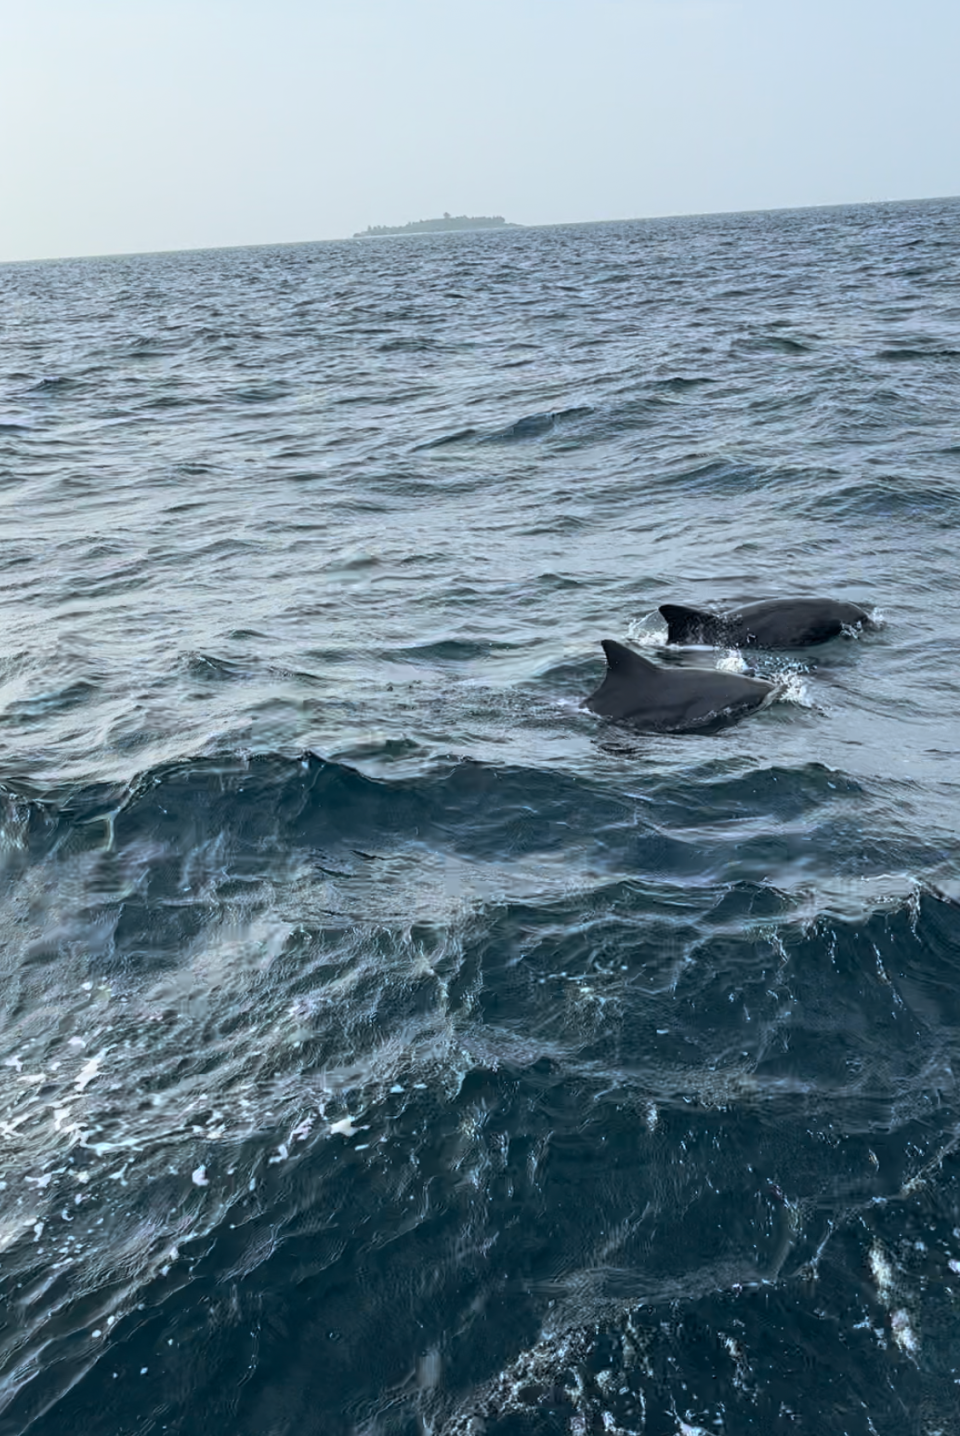 Spotting marine life in the Maldives is easy, I saw this pod of dolphins on my sunset fishing excursion.